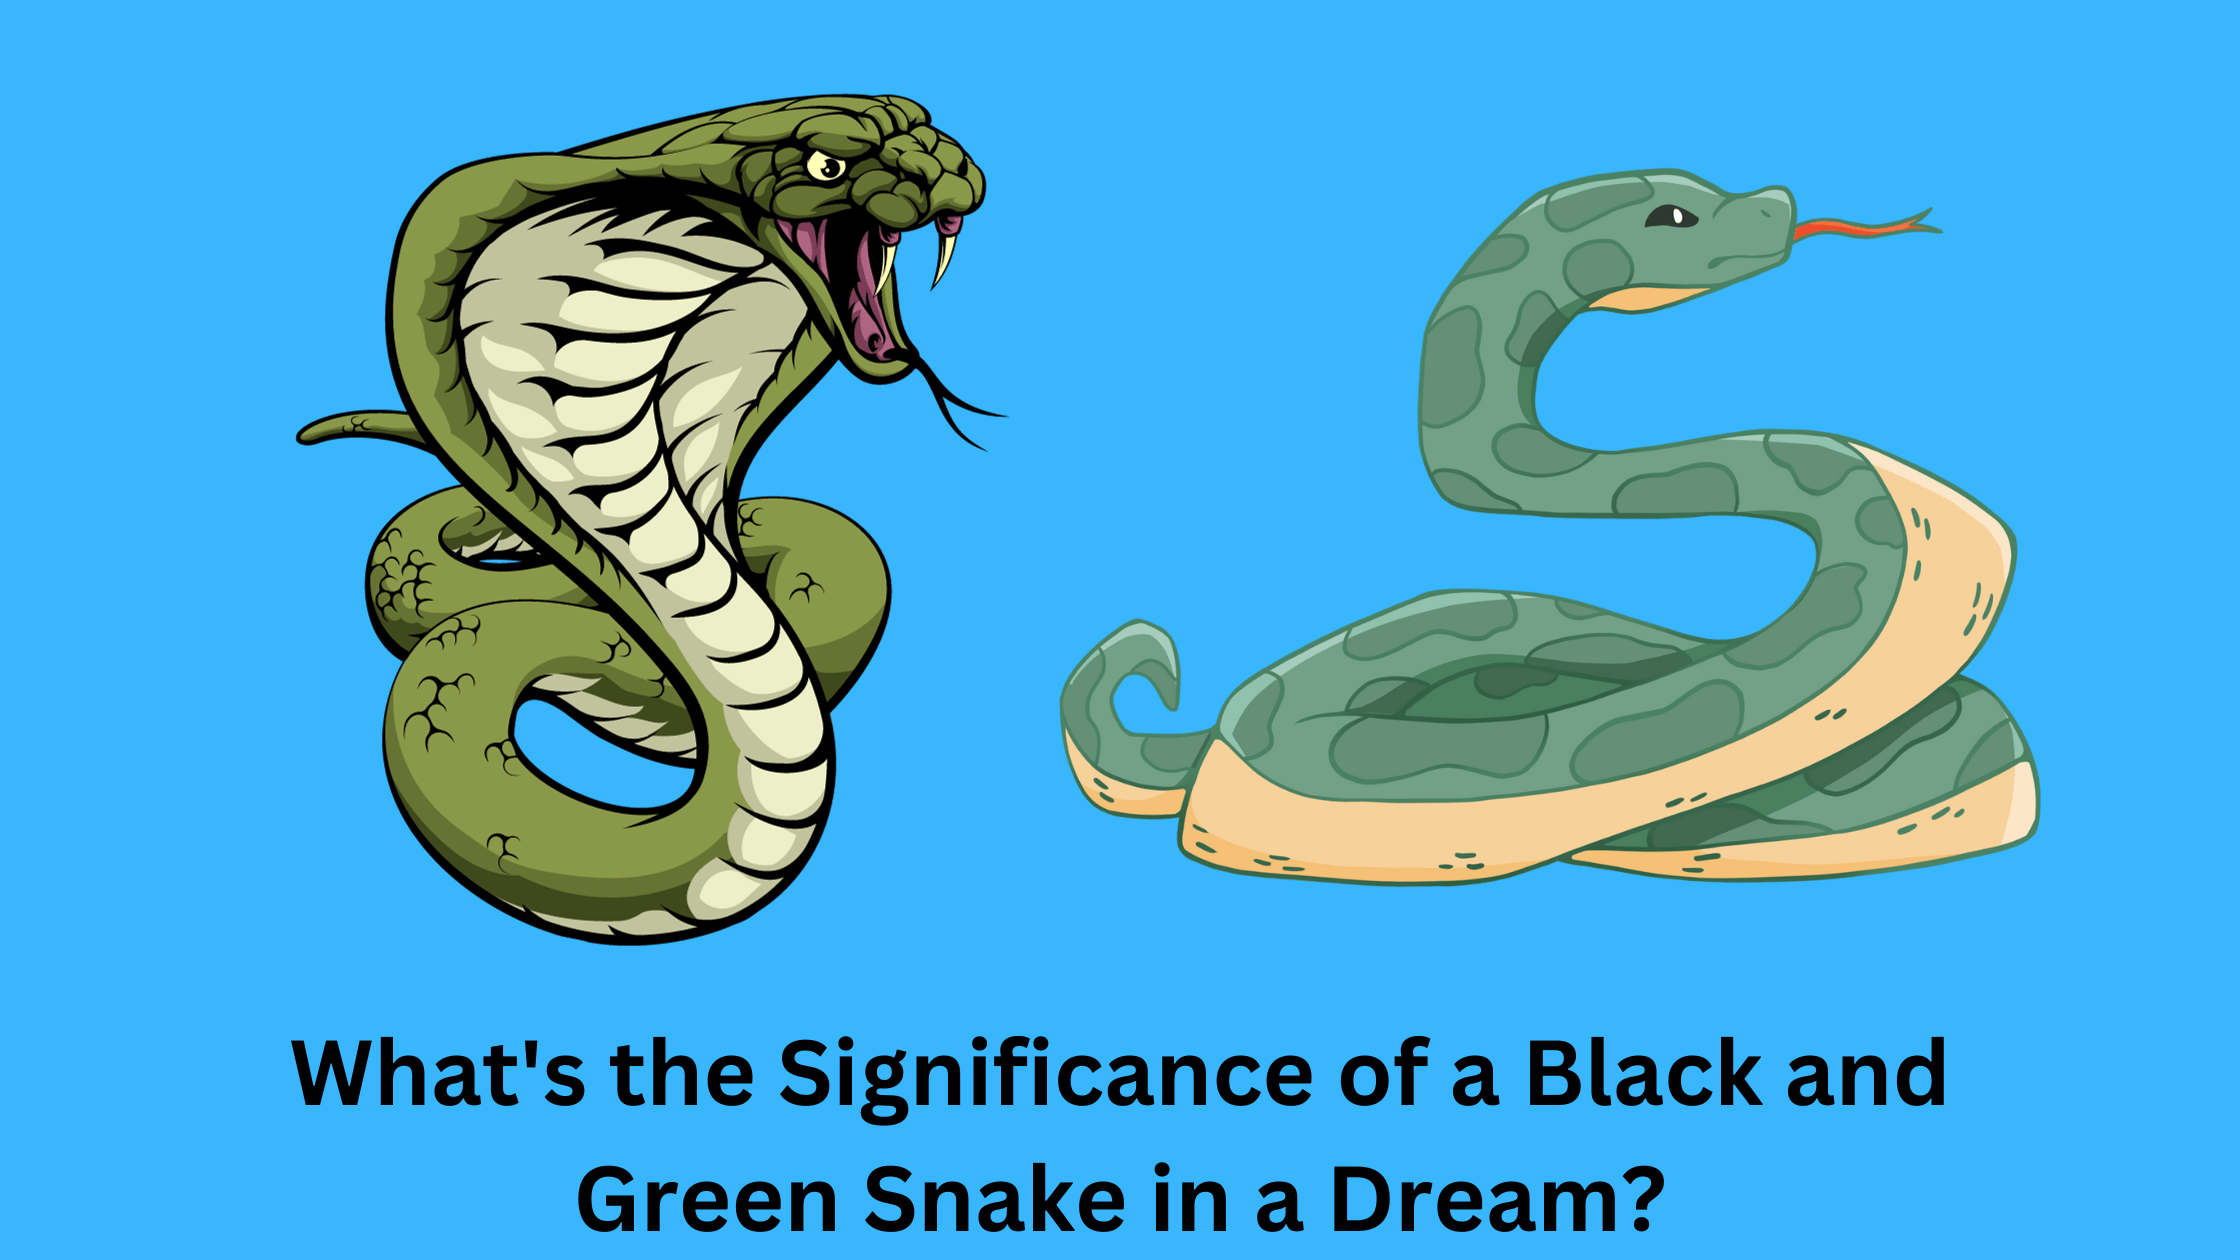 What's the Significance of a Black and Green Snake in a Dream